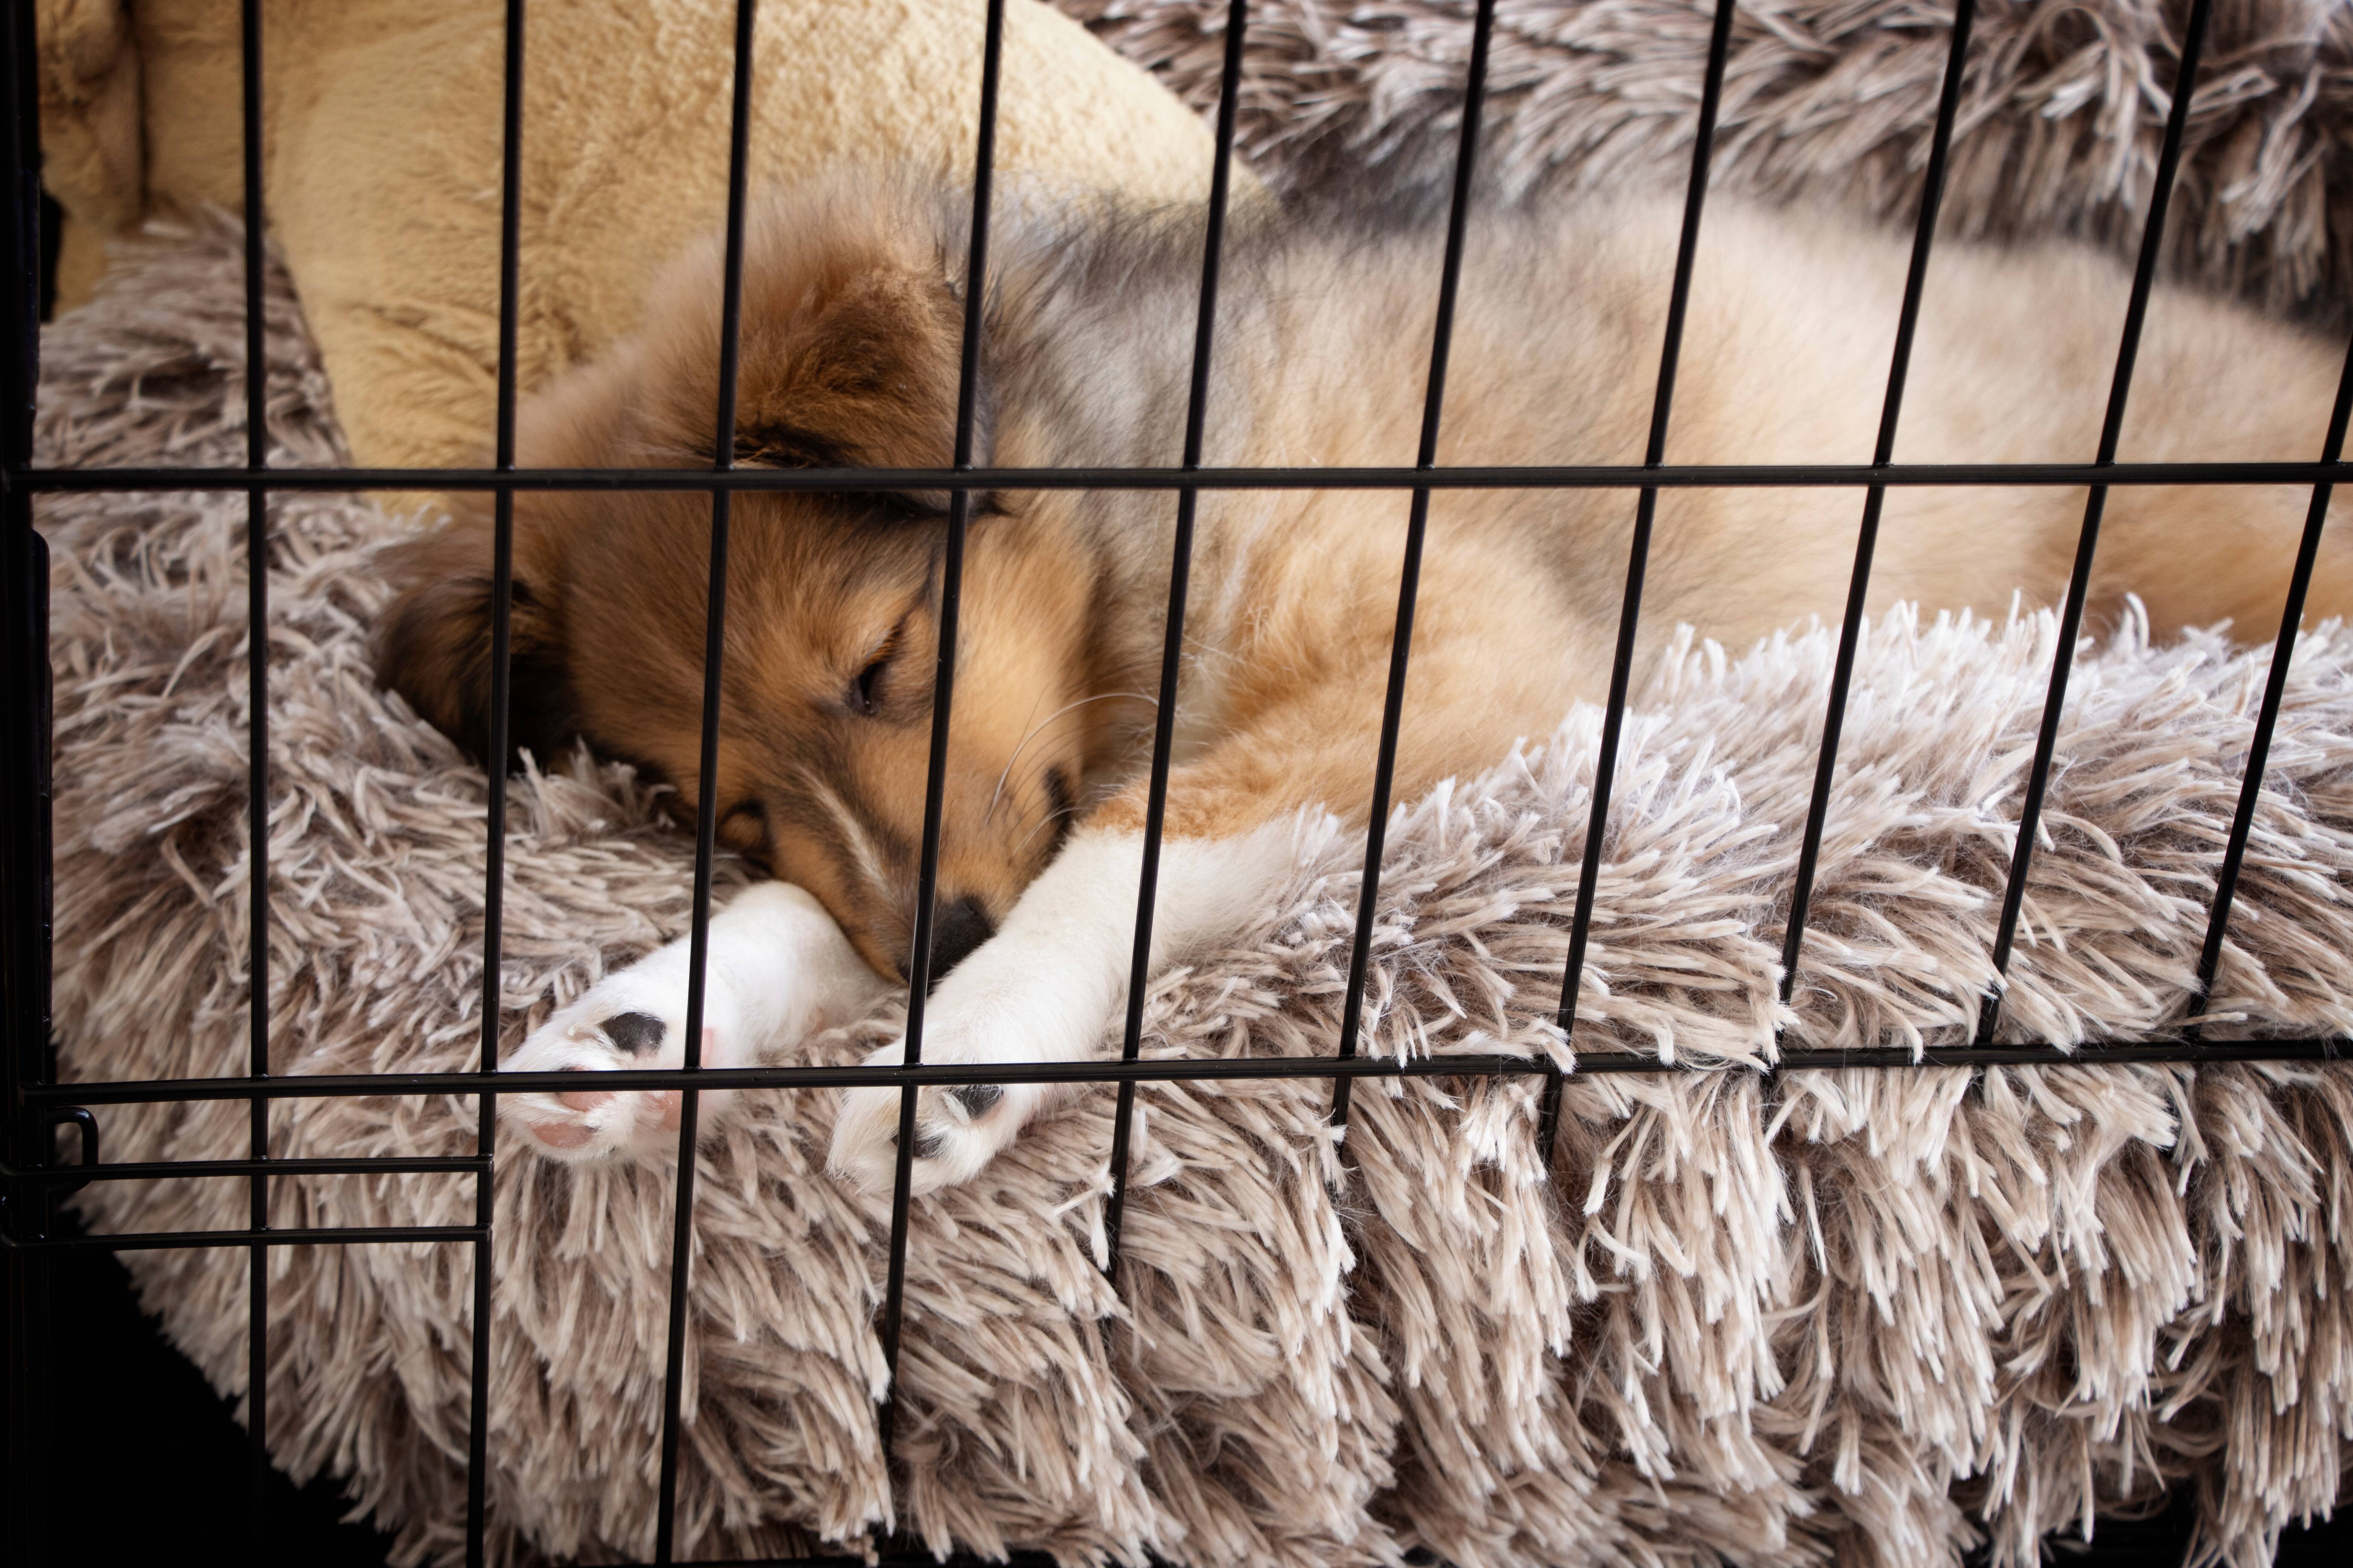 Why and how should I crate train my dog? – RSPCA Knowledgebase